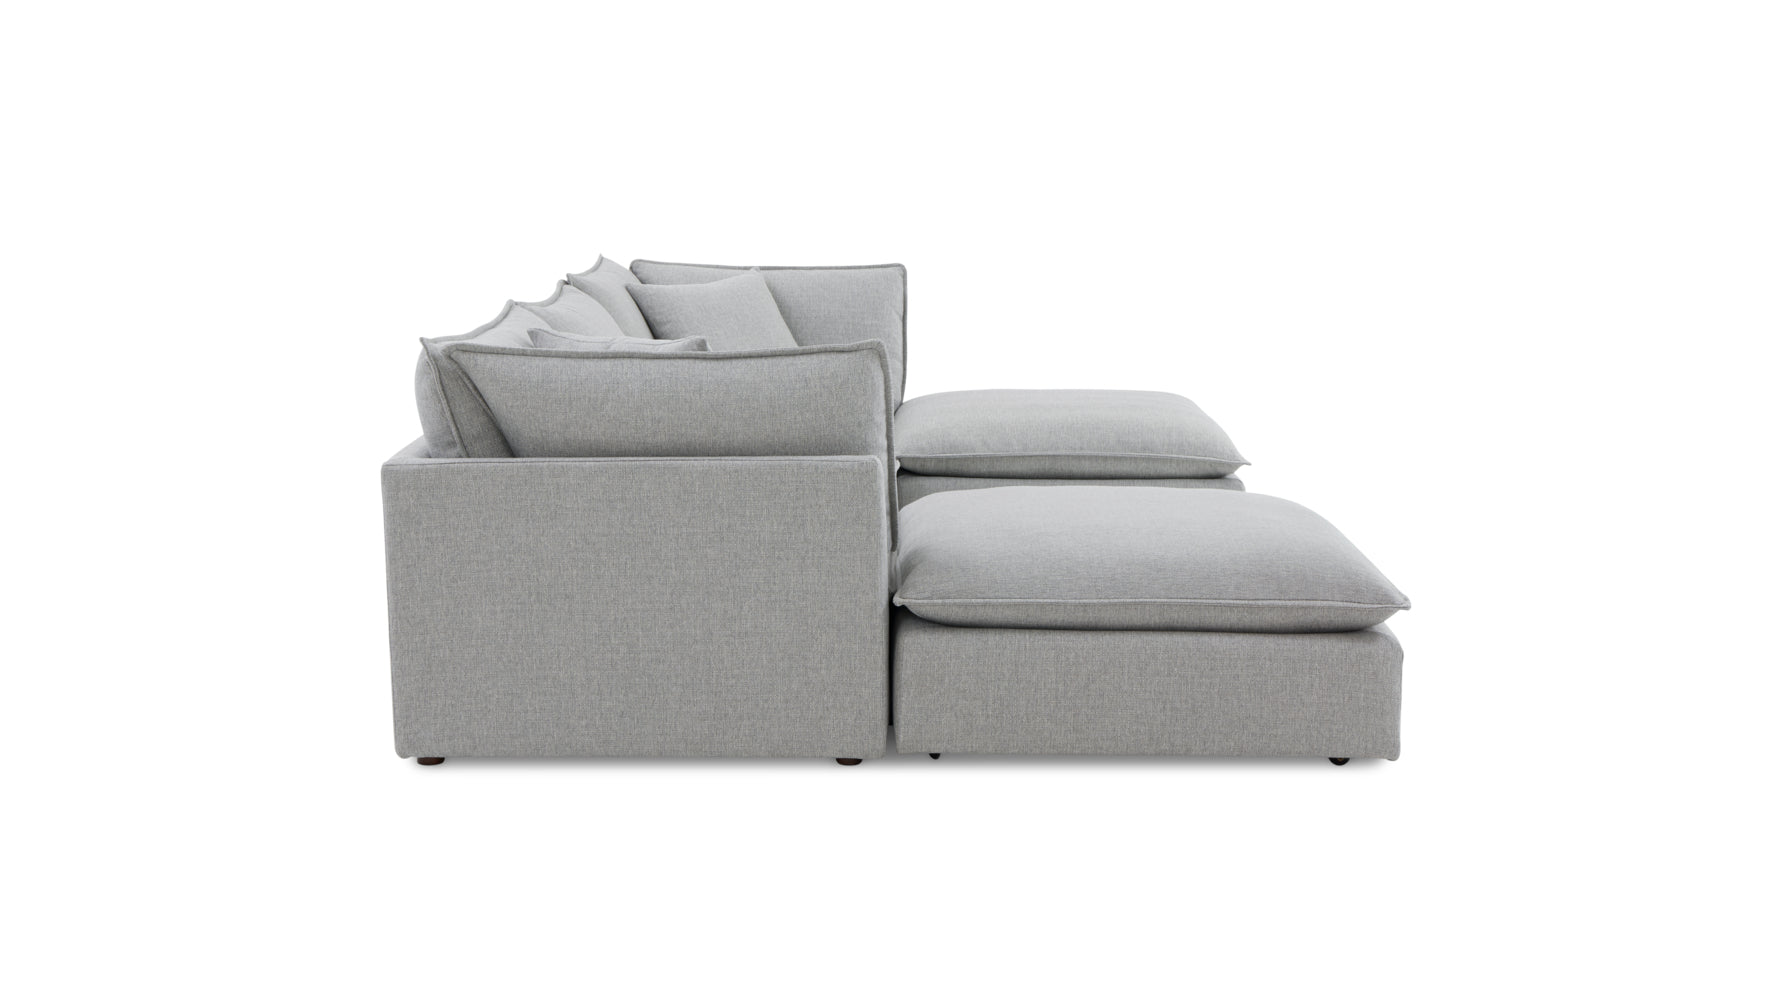 Chill Time 5-Piece Modular U-Shaped Sectional, Heather - Image 3